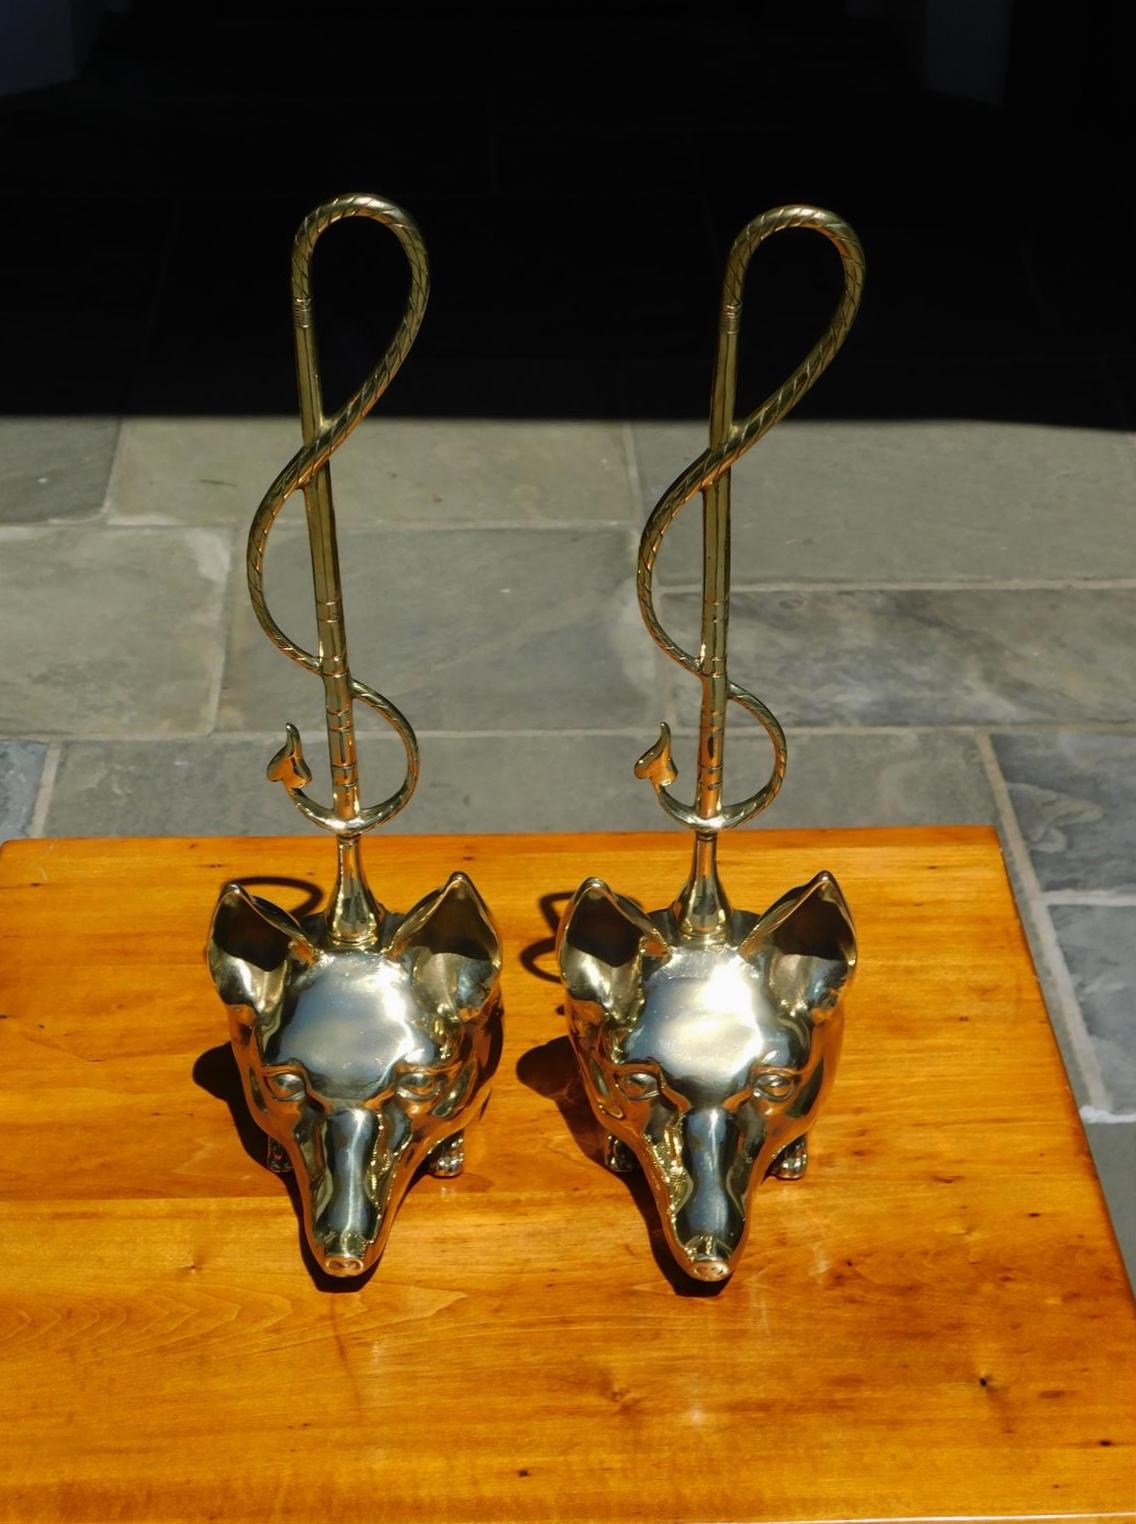 Pair of American brass fox head doorstops with decorative chased intertwined carrying handles, late 19th century.